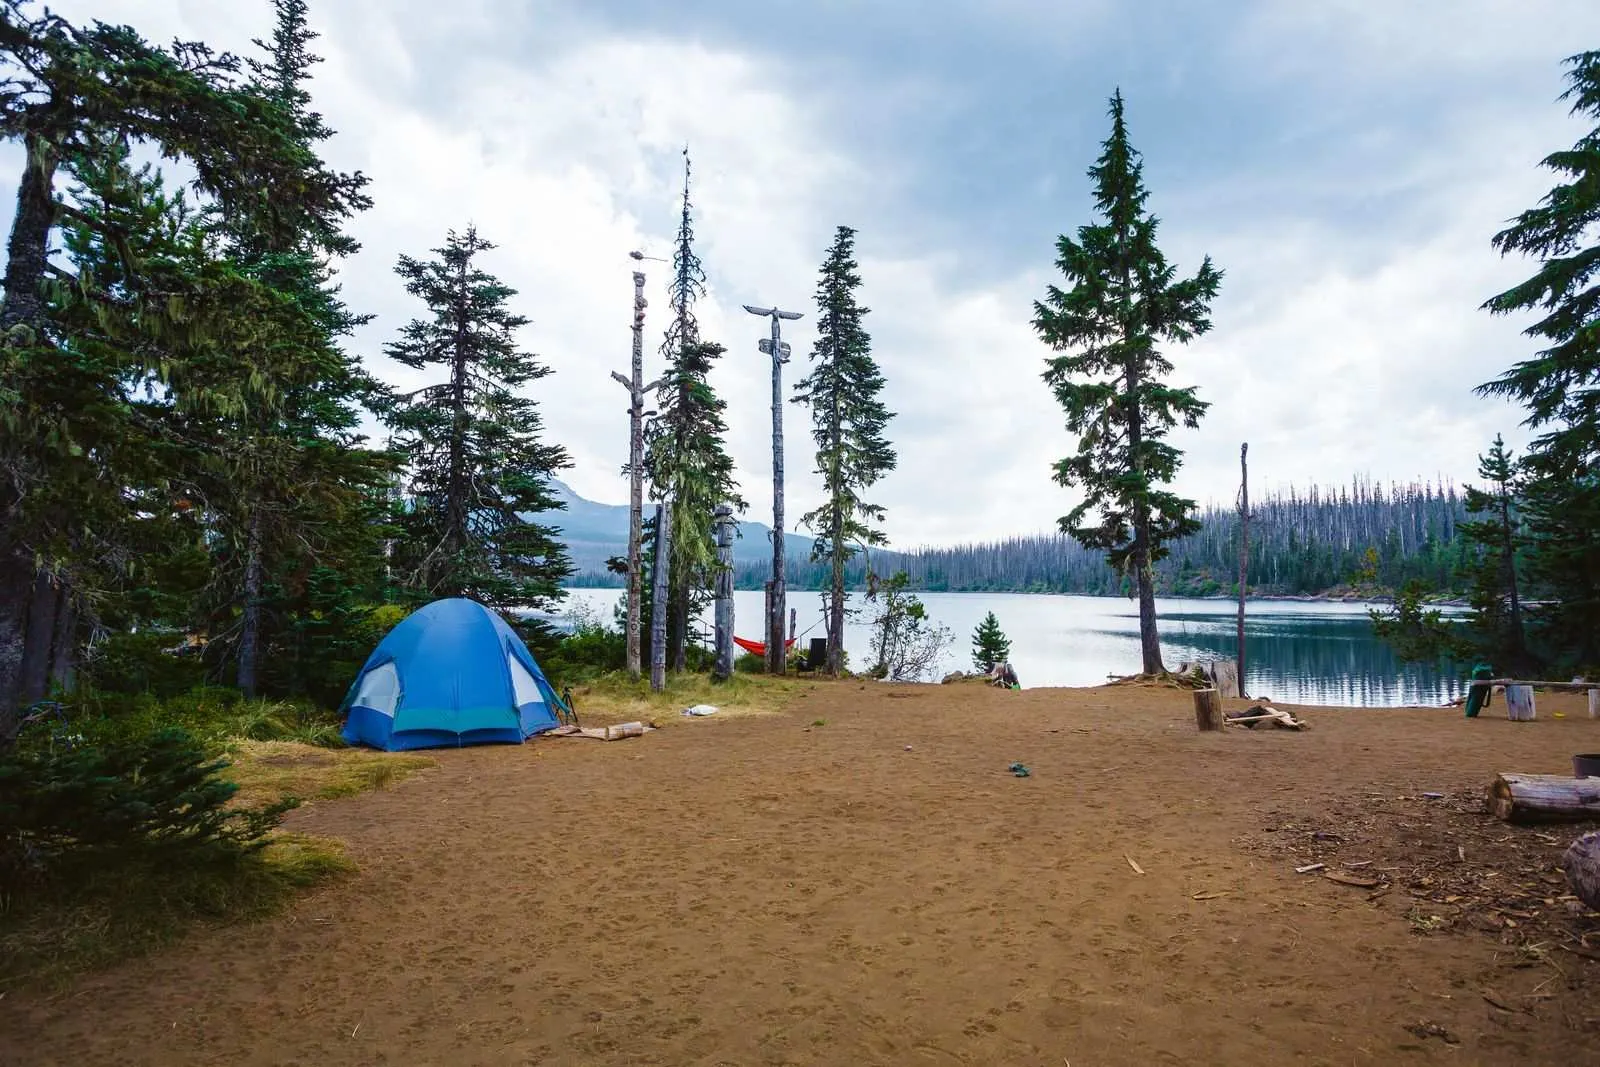 The Best Places for Camping Near Portland